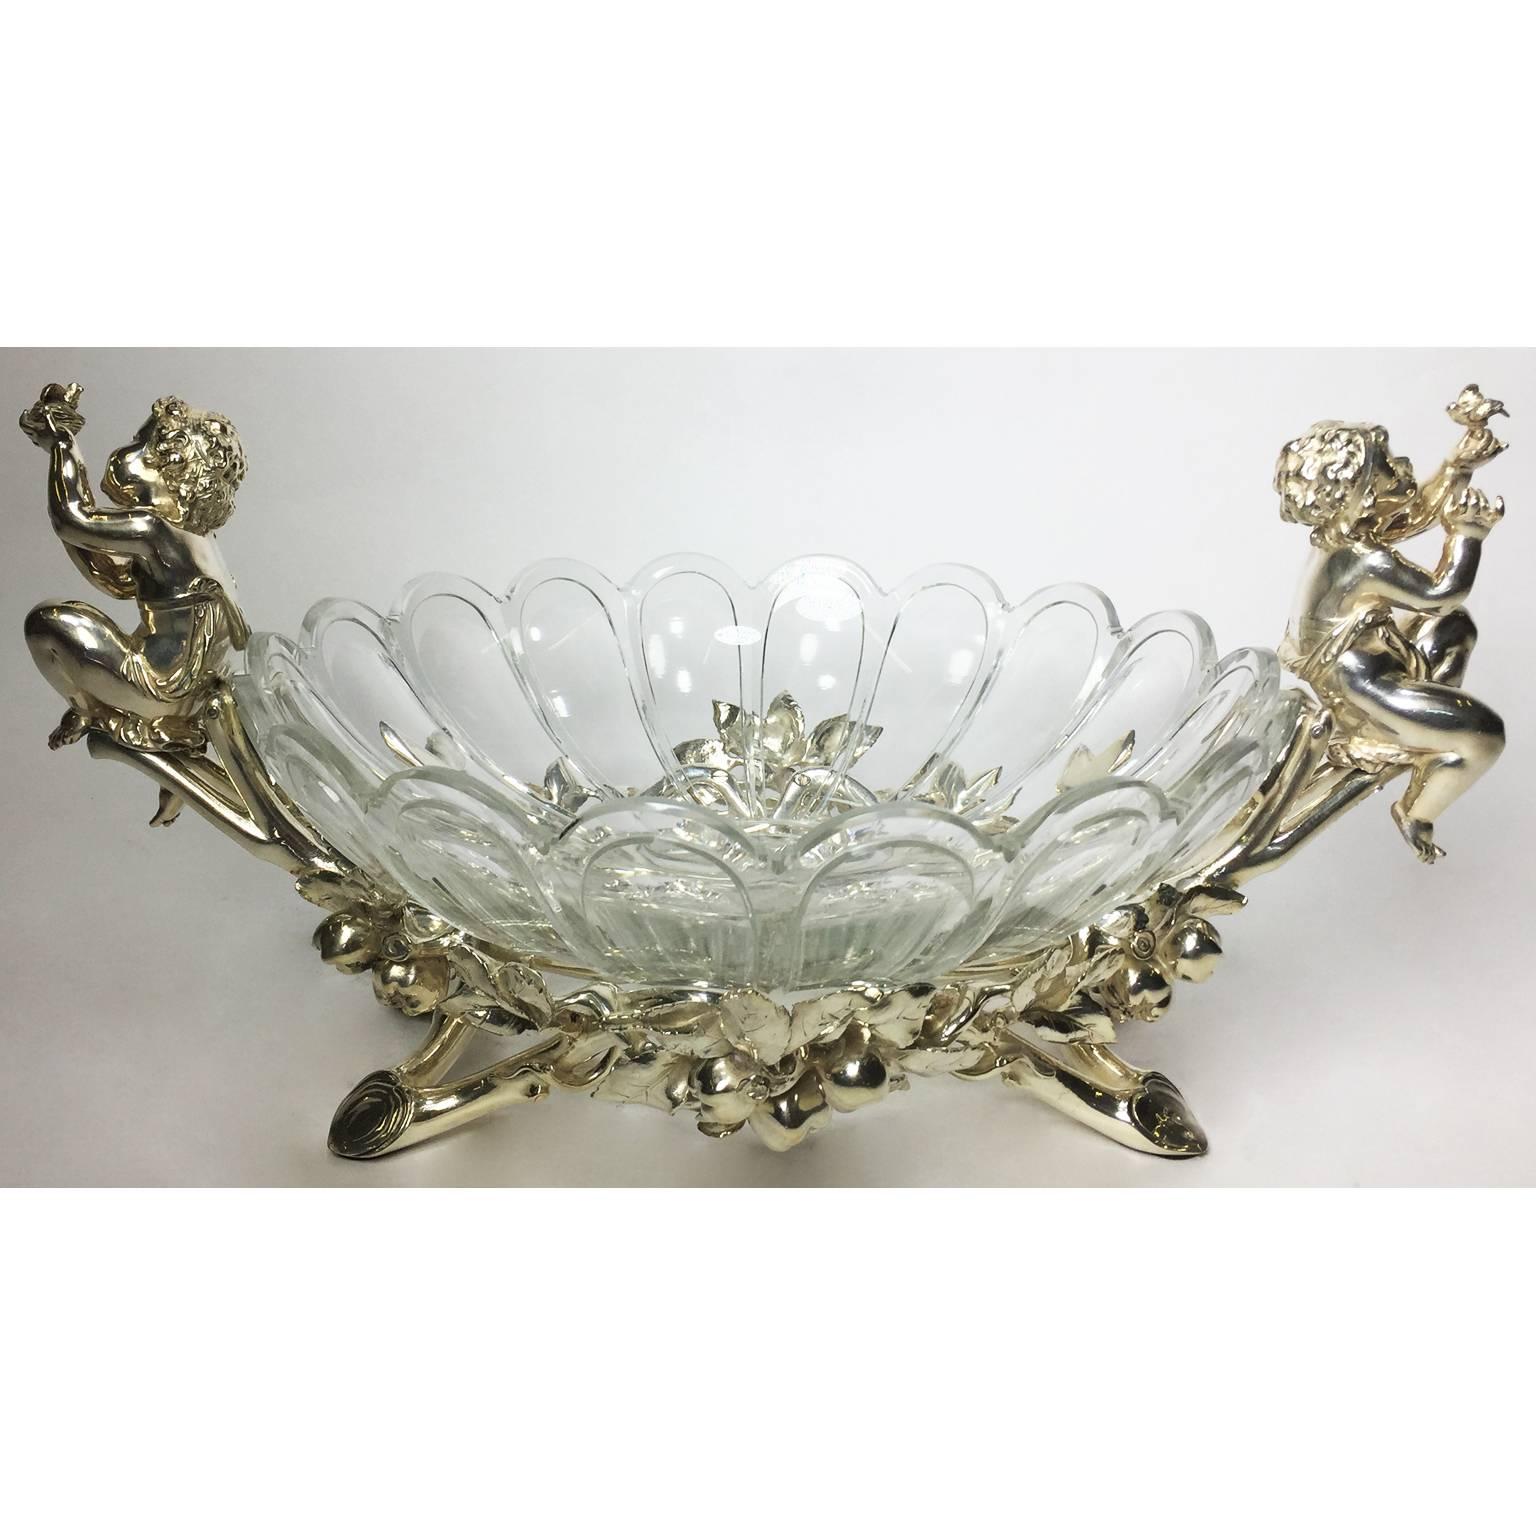 A very fine French 19th-20th century Christofle & Cie Louis XV style silvered figural centerpiece with a circular scalloped cut-glass bowl attributed to Baccarat, the center-dish flanked by two seated putti, one holding a bird and the other a